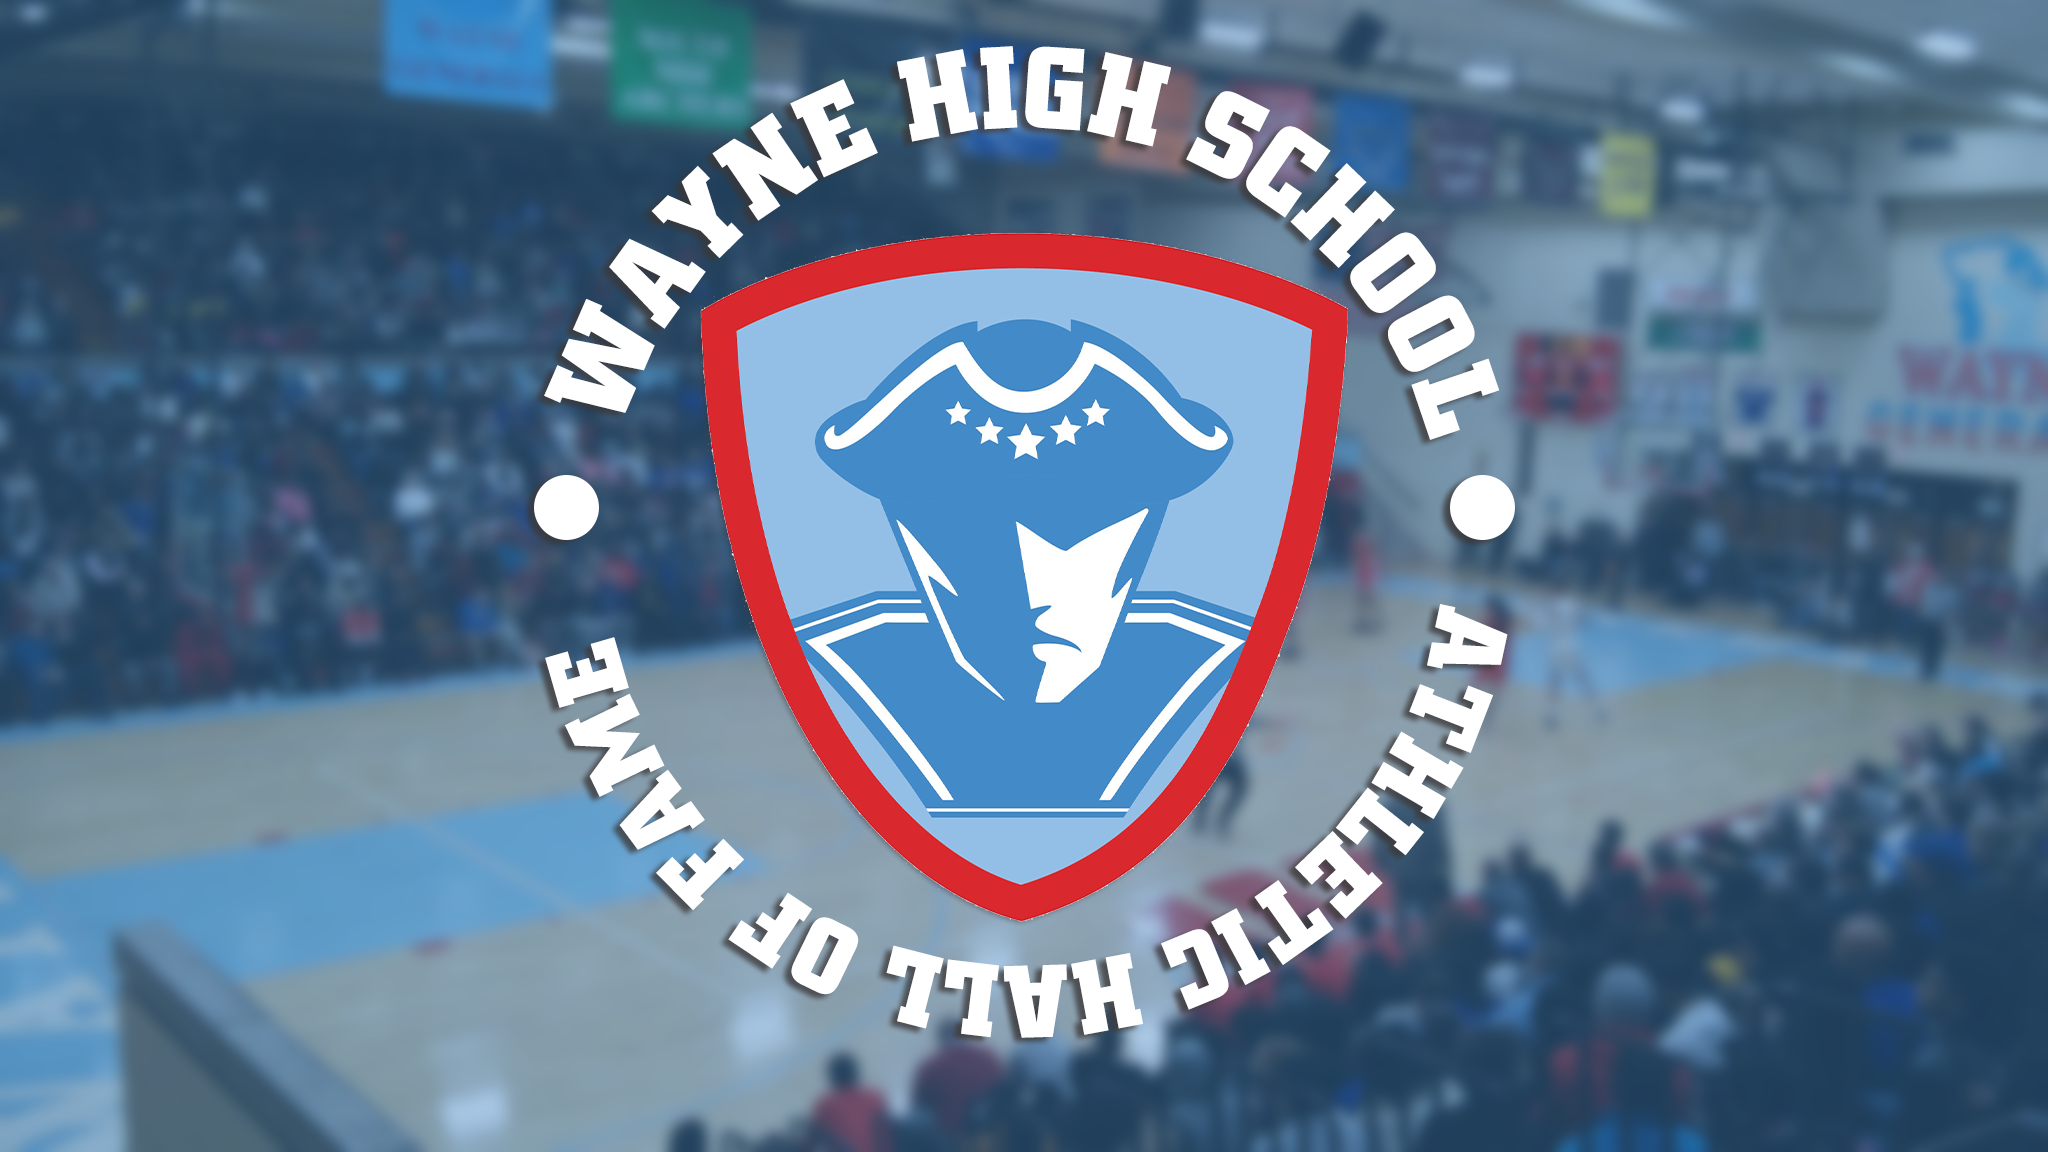 Nominations for 2023 Wayne High School Athletic Hall of Fame